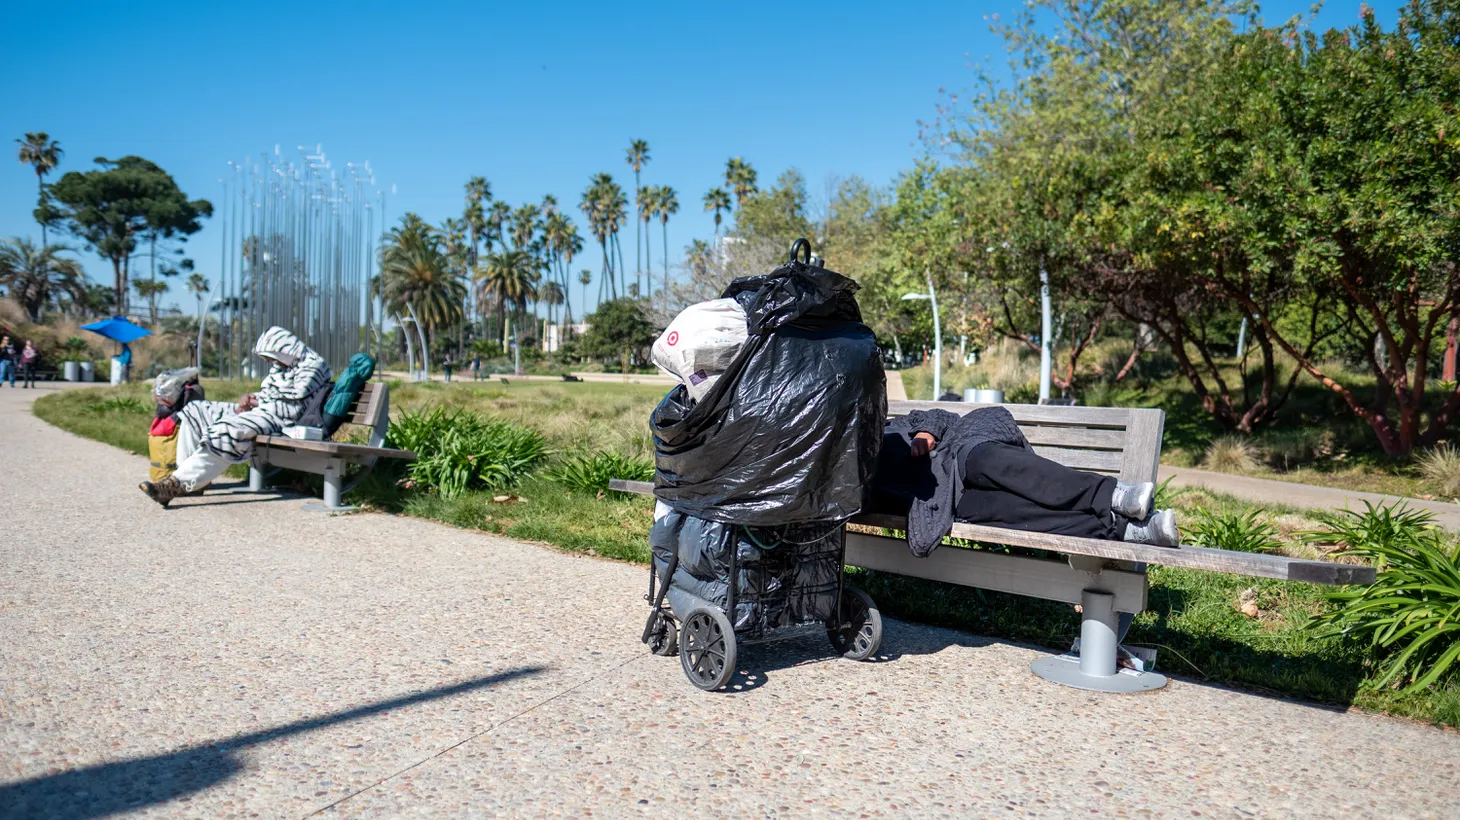 Two unhoused individuals occupy separate benches in Tongva Park, Santa Monica, February 25, 2022. “People become homeless when they have no personal safety net in their family or their network. So they have exhausted all of the resources available to them,” says Janey Rountree, executive director of the California Policy Lab at UCLA.